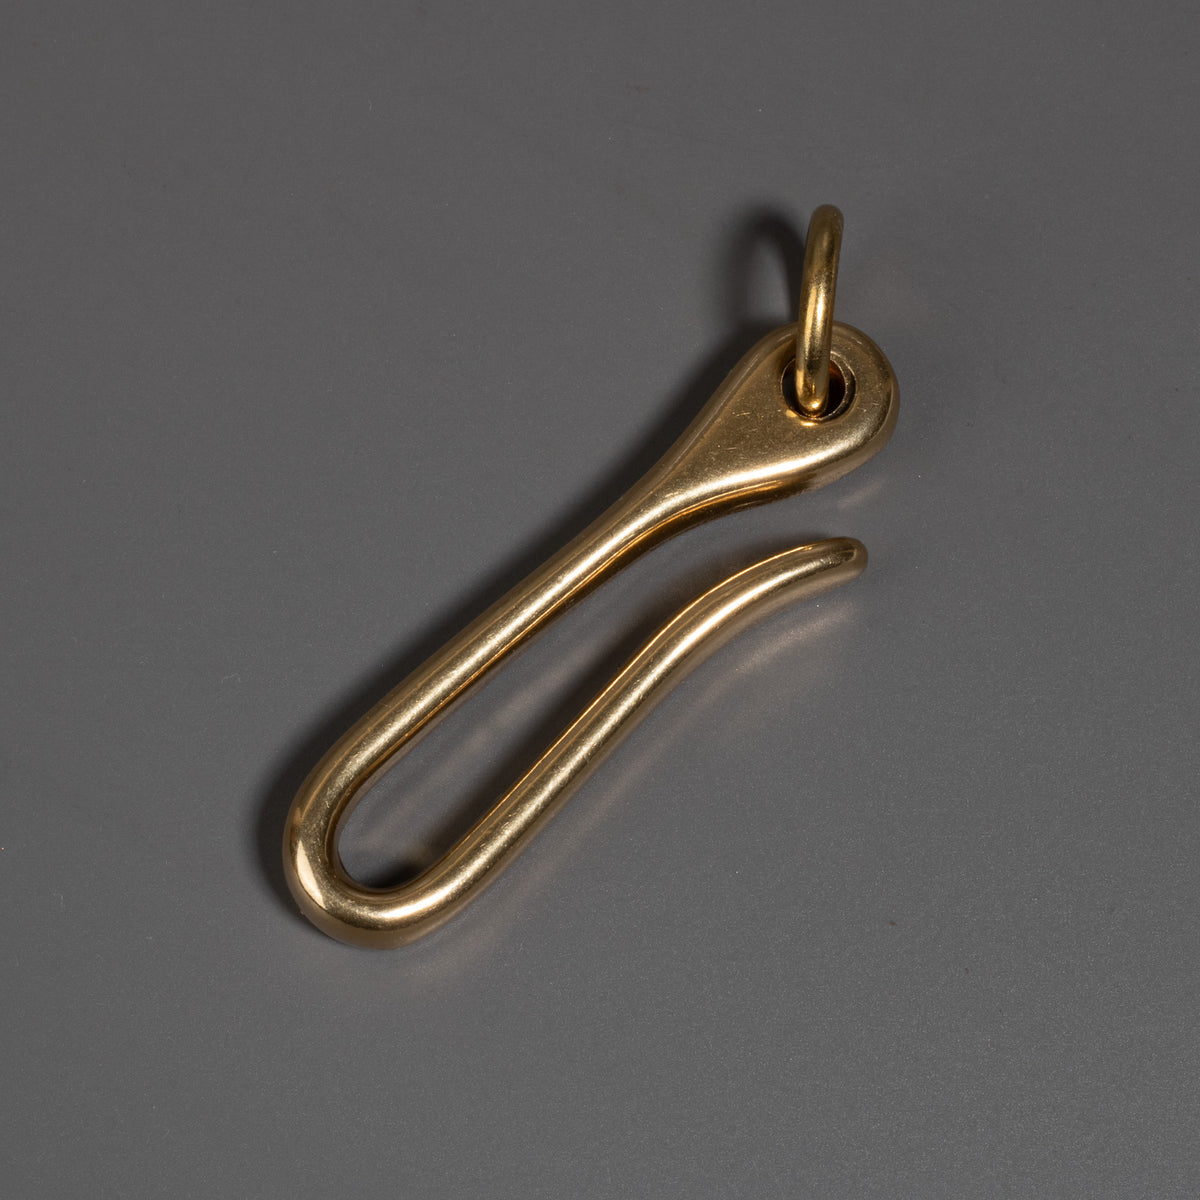 SOLID BRASS FISH HOOK